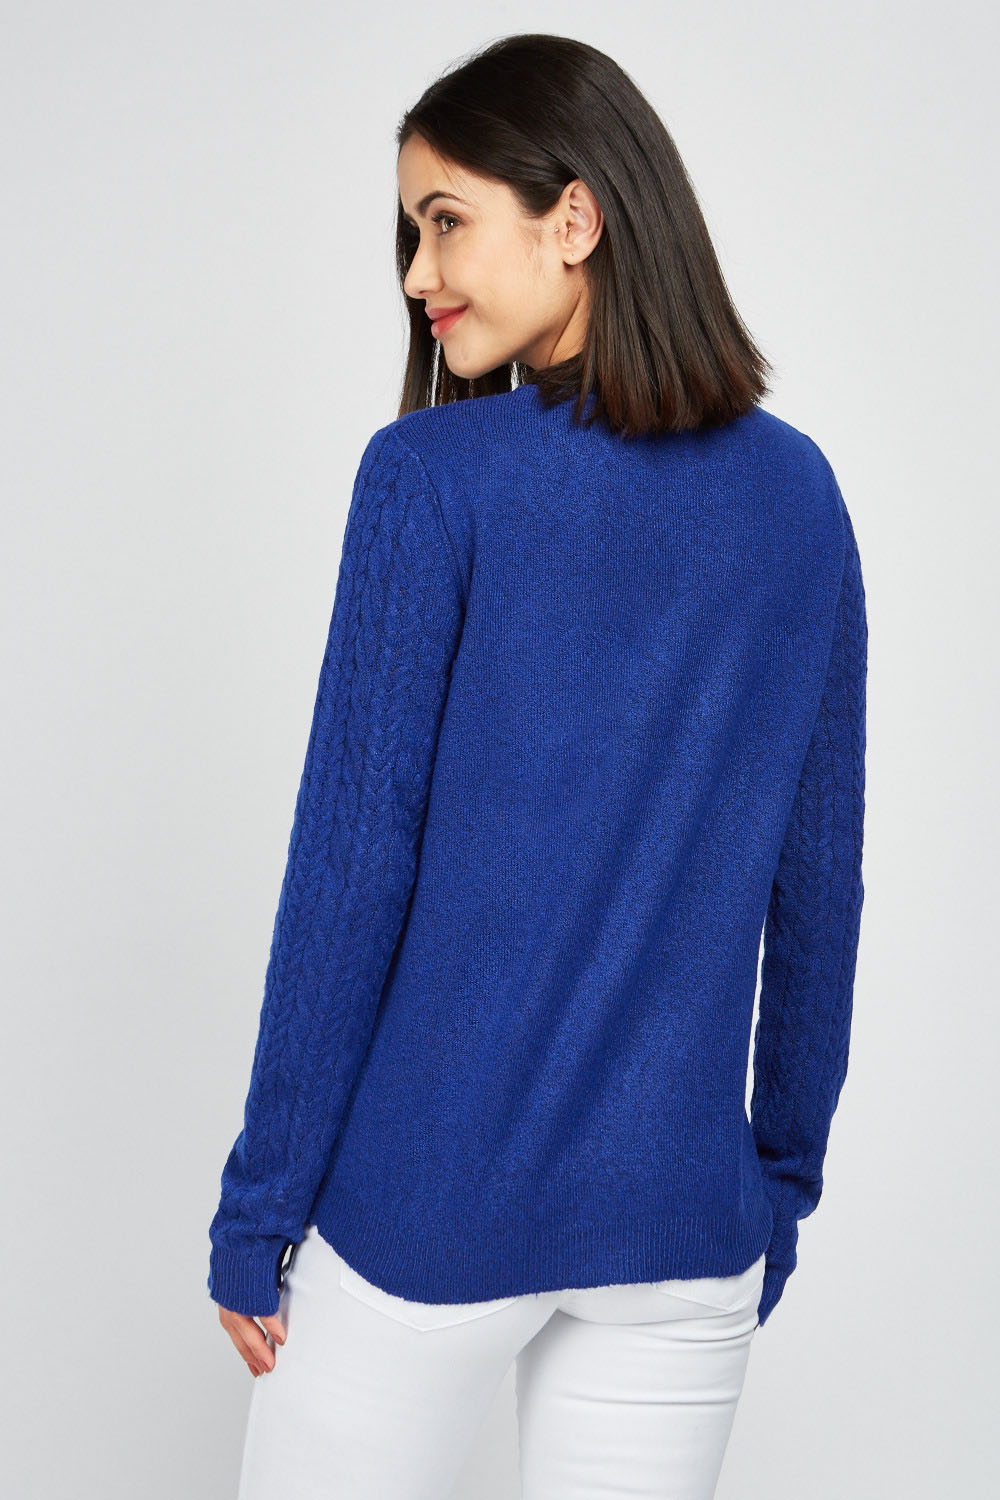 Northern reflections royal blue cardigans for women photos youtube travel midi